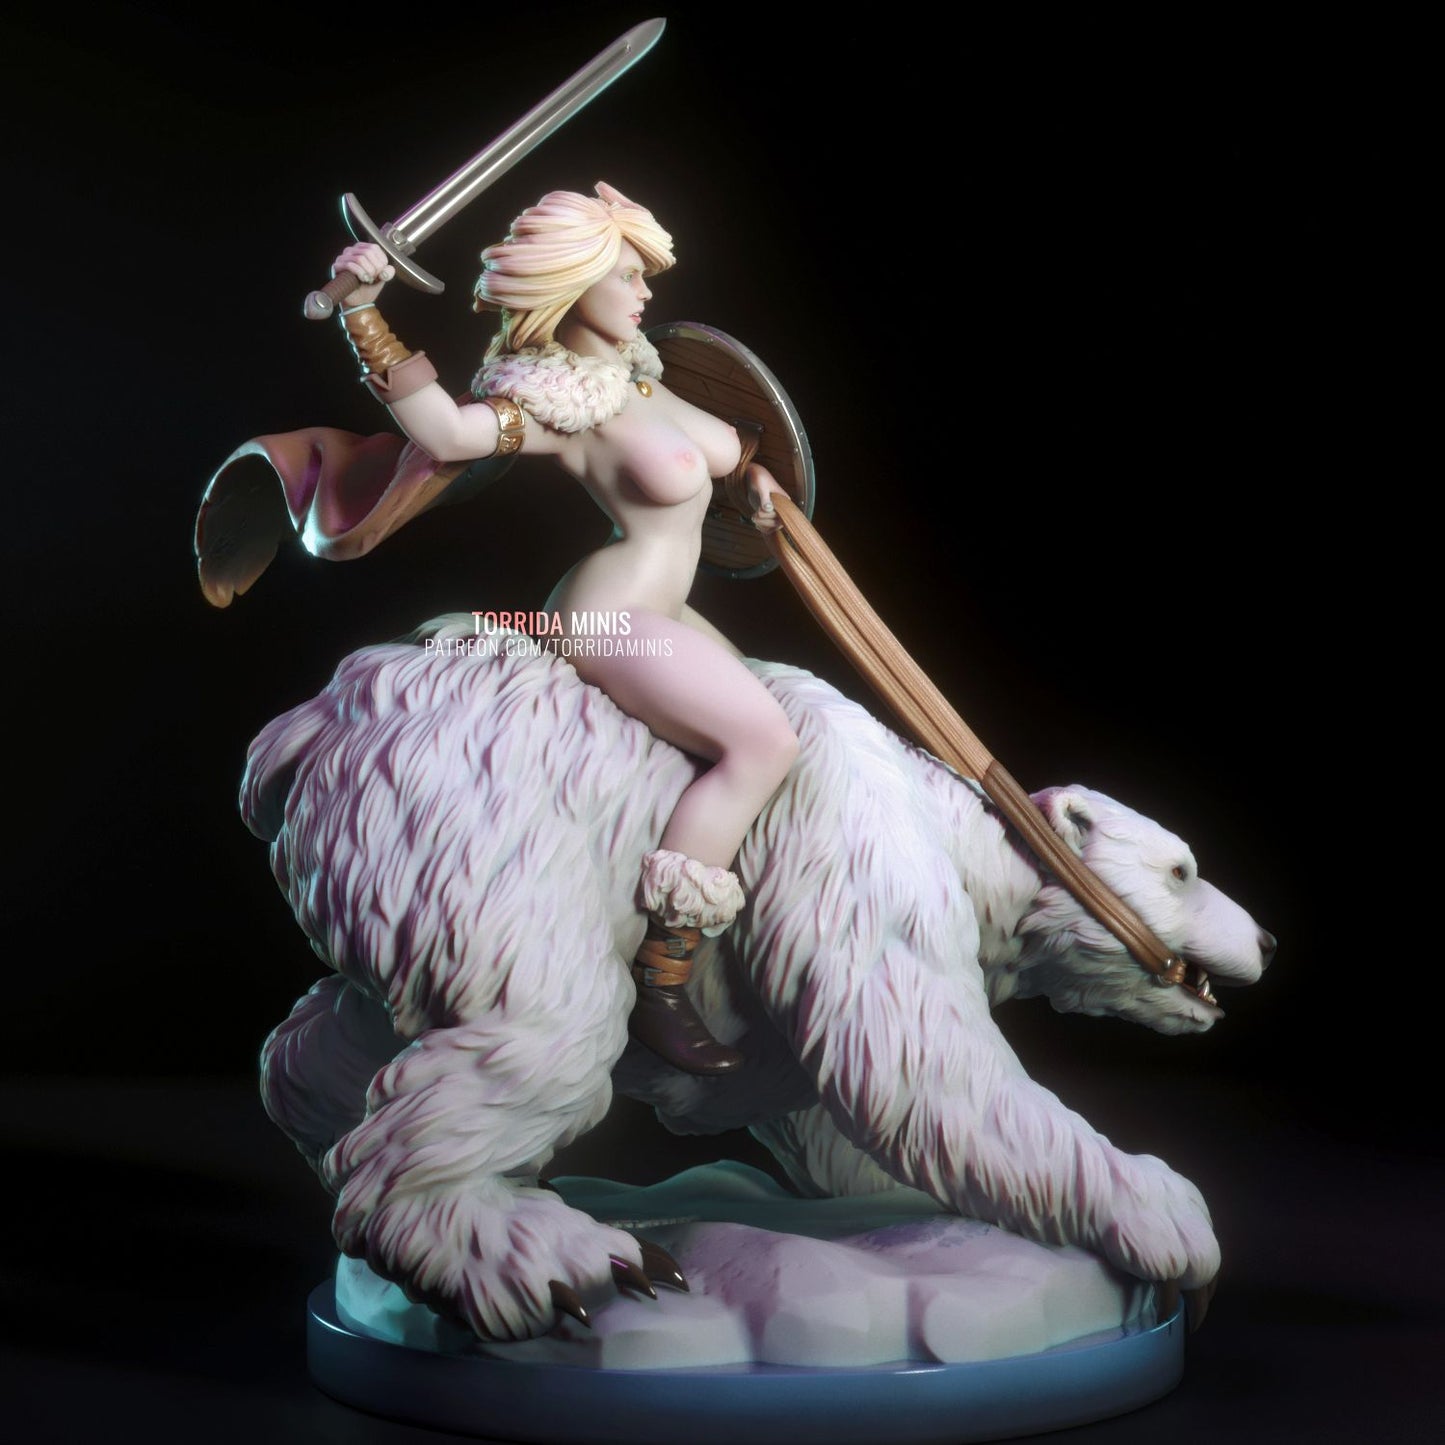 Hilde a barbarian girl based on an old Rumple Minze NSFW 3D Printed figure Fanart by Torrida Minis